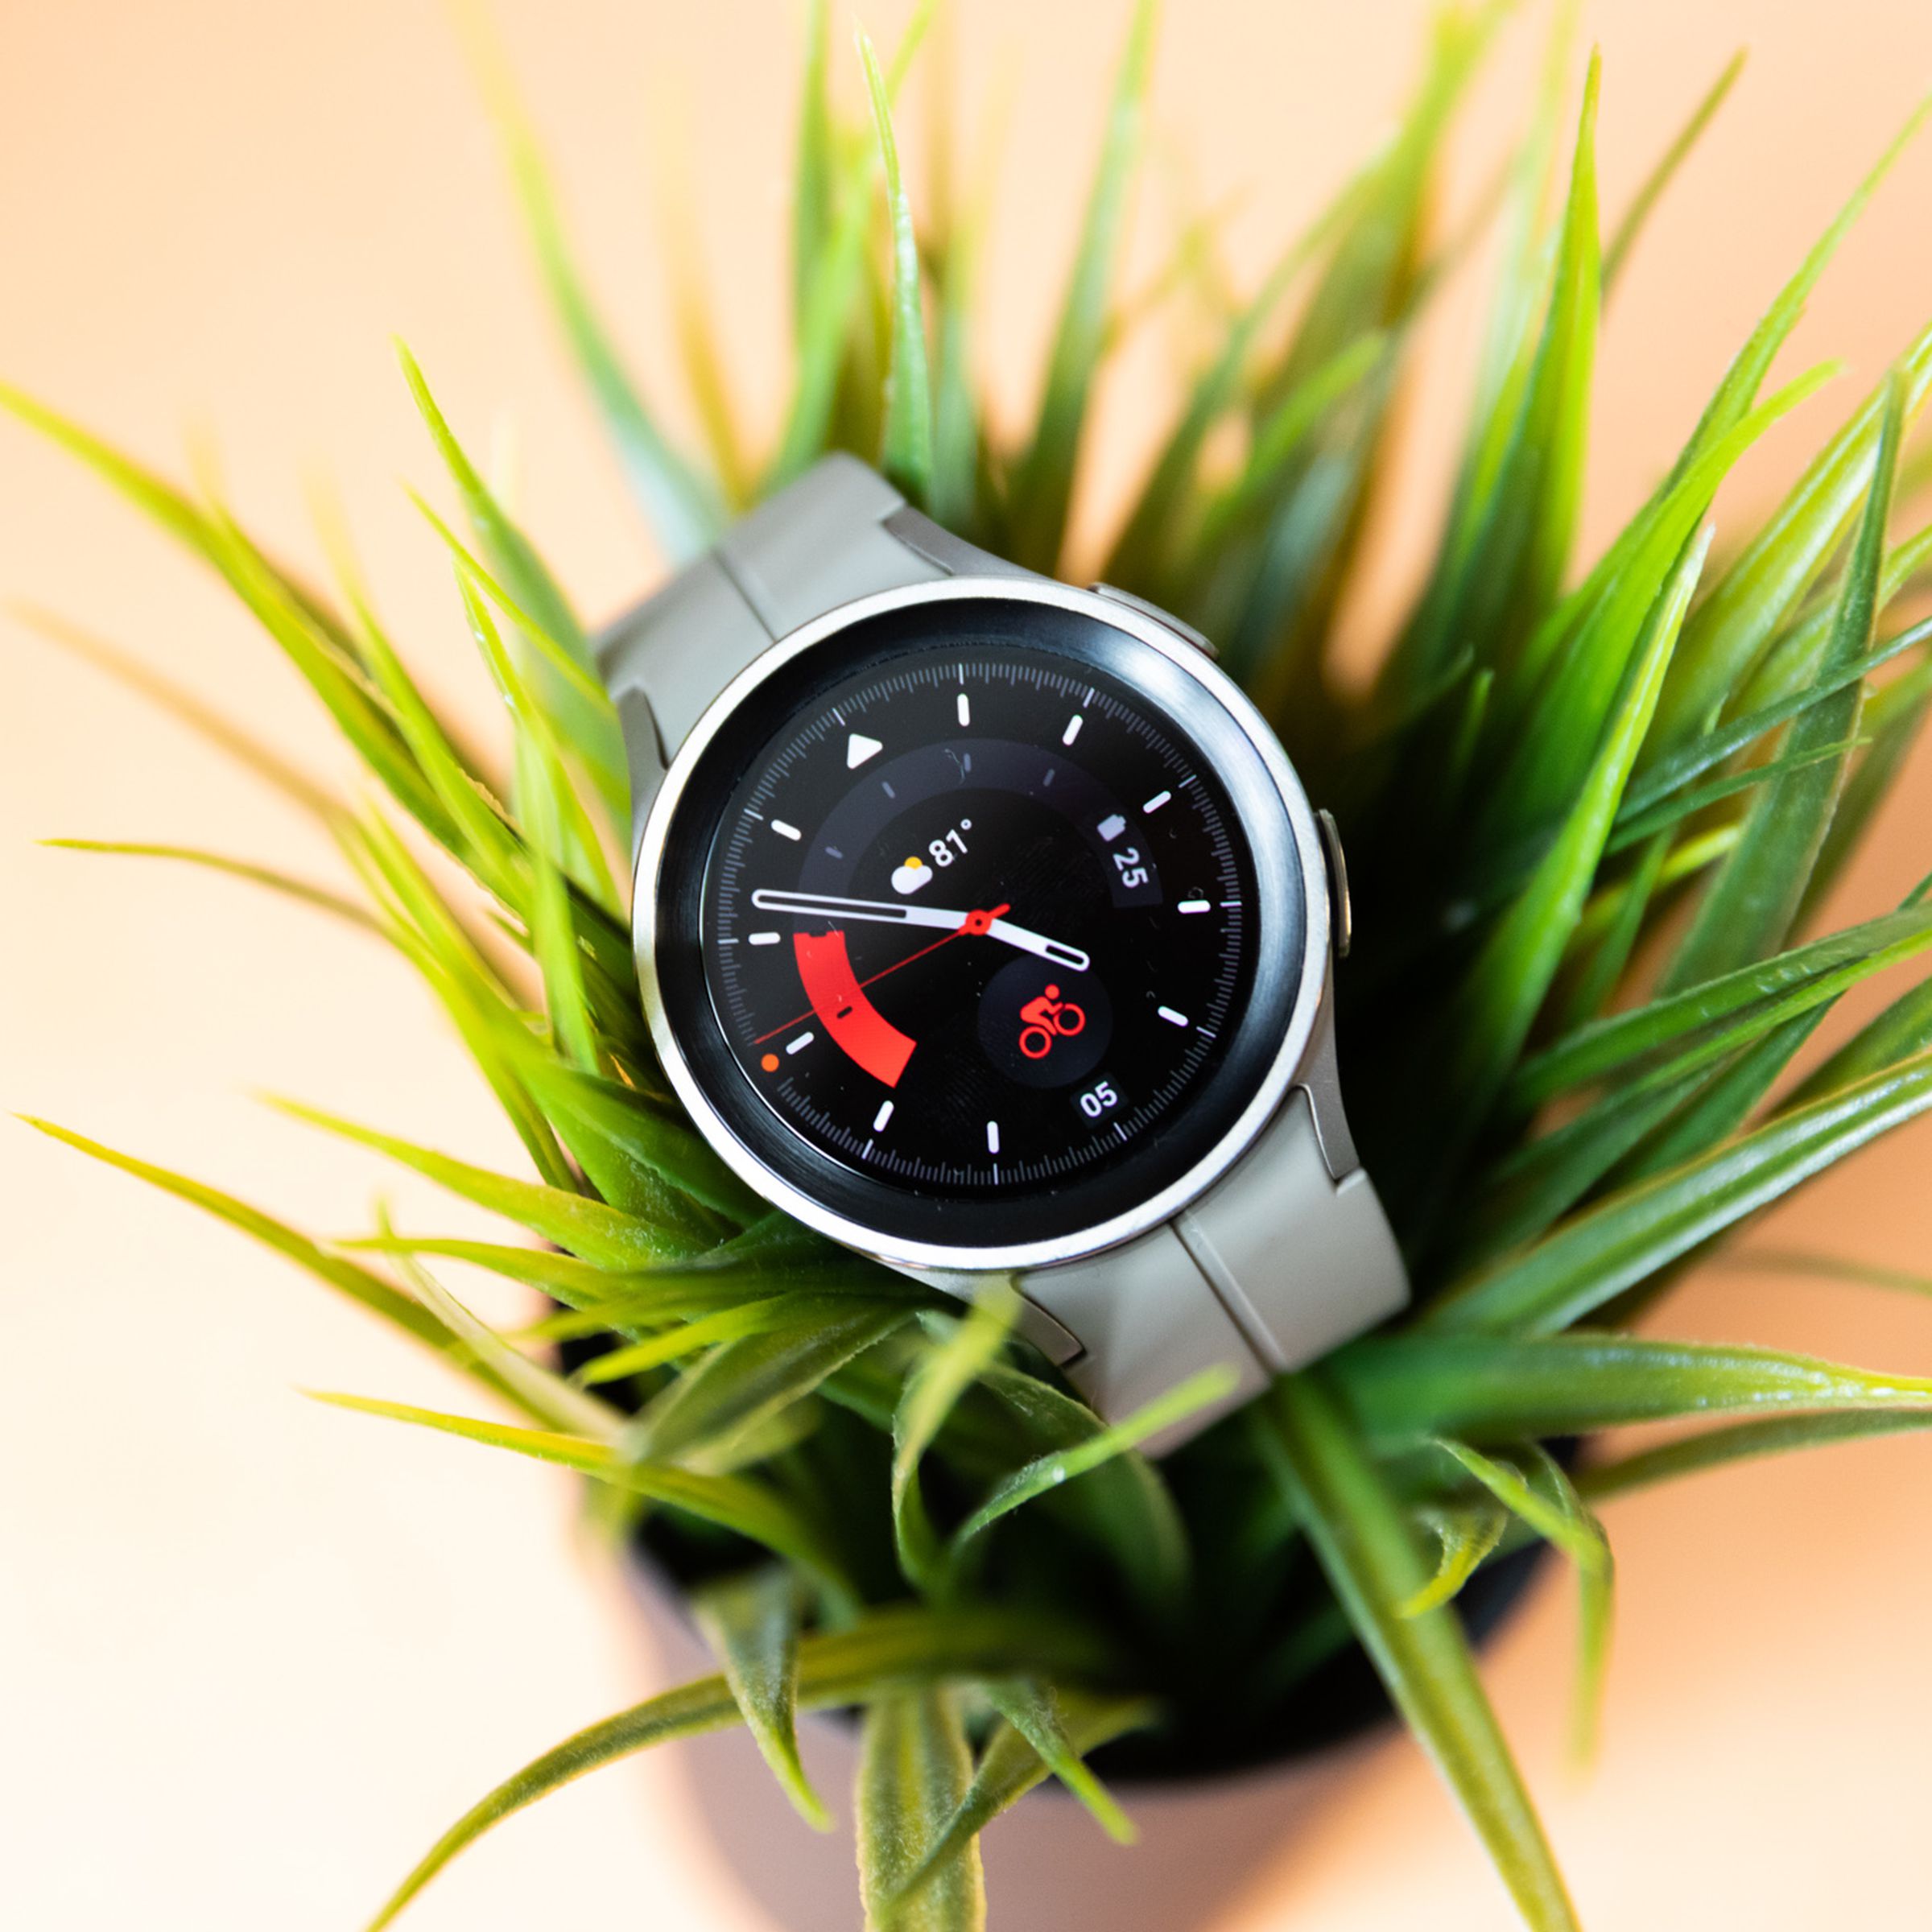 Pic of the Galaxy Watch 5 Pro on a plant